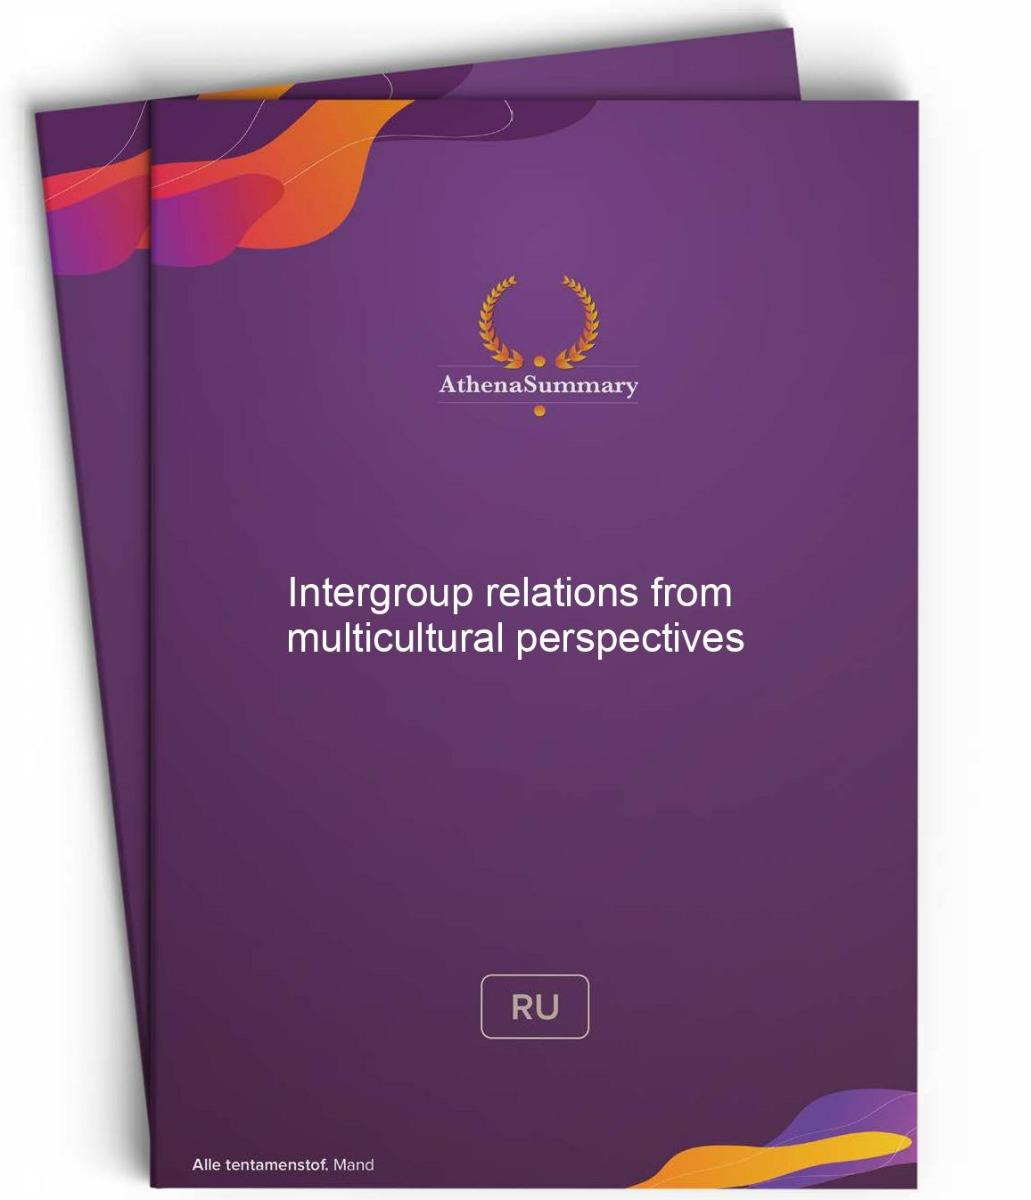 Intergroup relations from multicultural perspectives - Literature summary